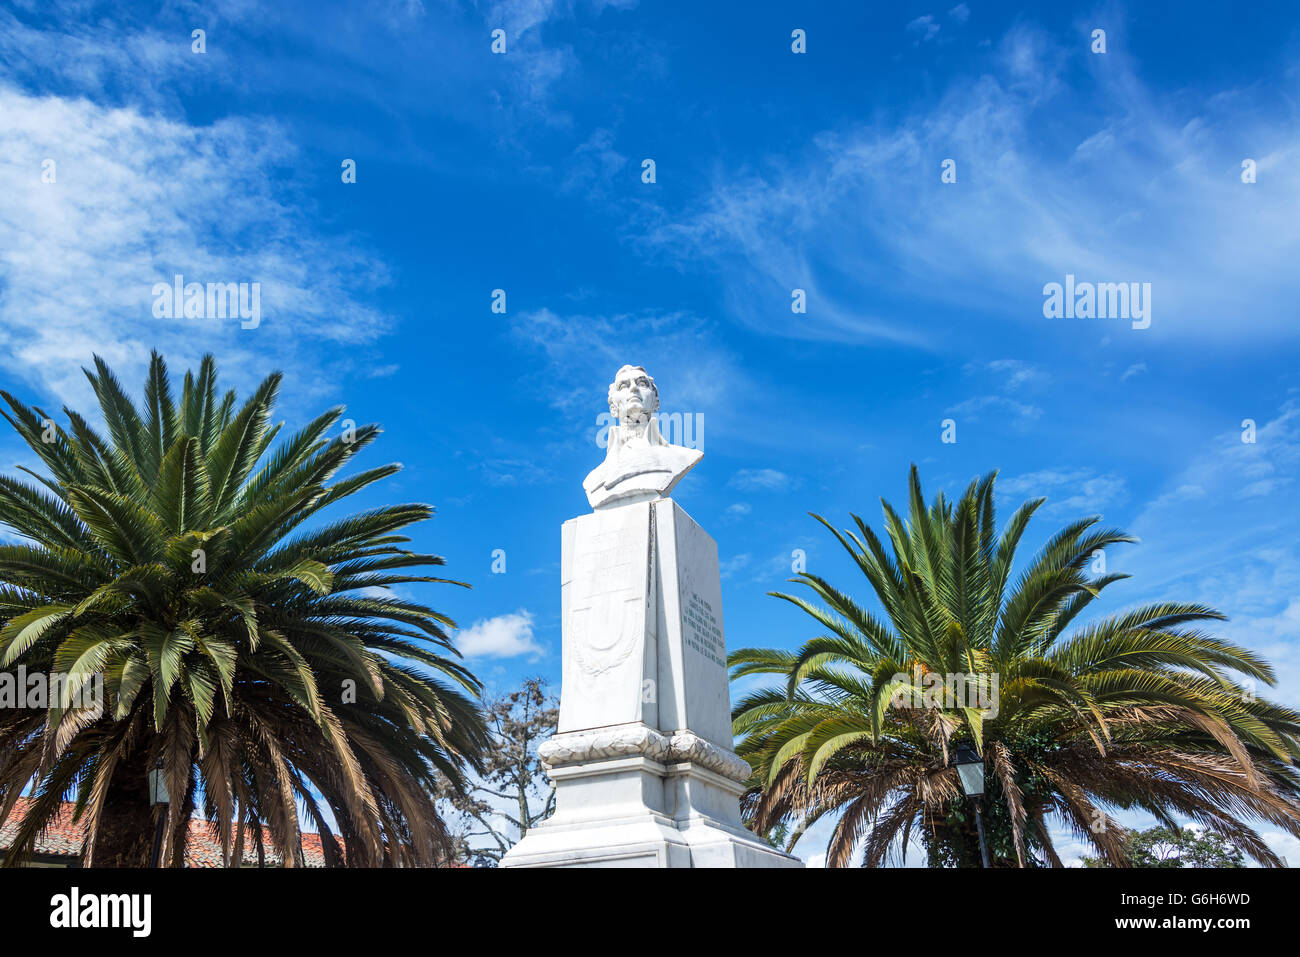 Bust of Antonio Narino in a public plaza in Villa de Leyva, Colombia with two palms trees and a beautiful blue sky visible Stock Photo